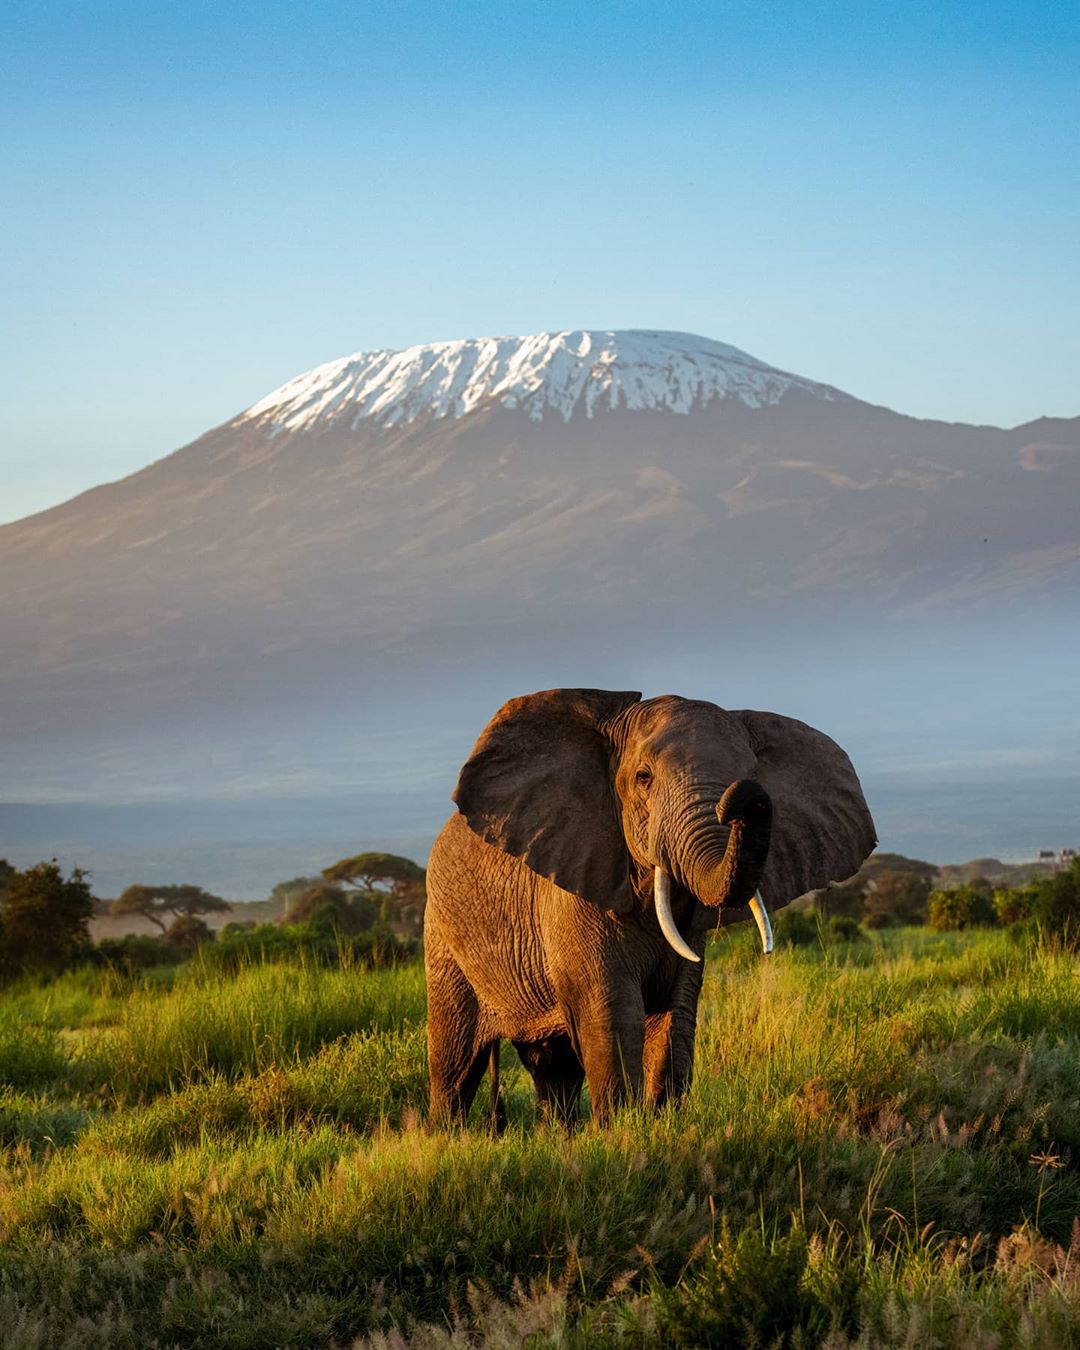 Picture of Elepahnts infront of Mount kilimanjaro